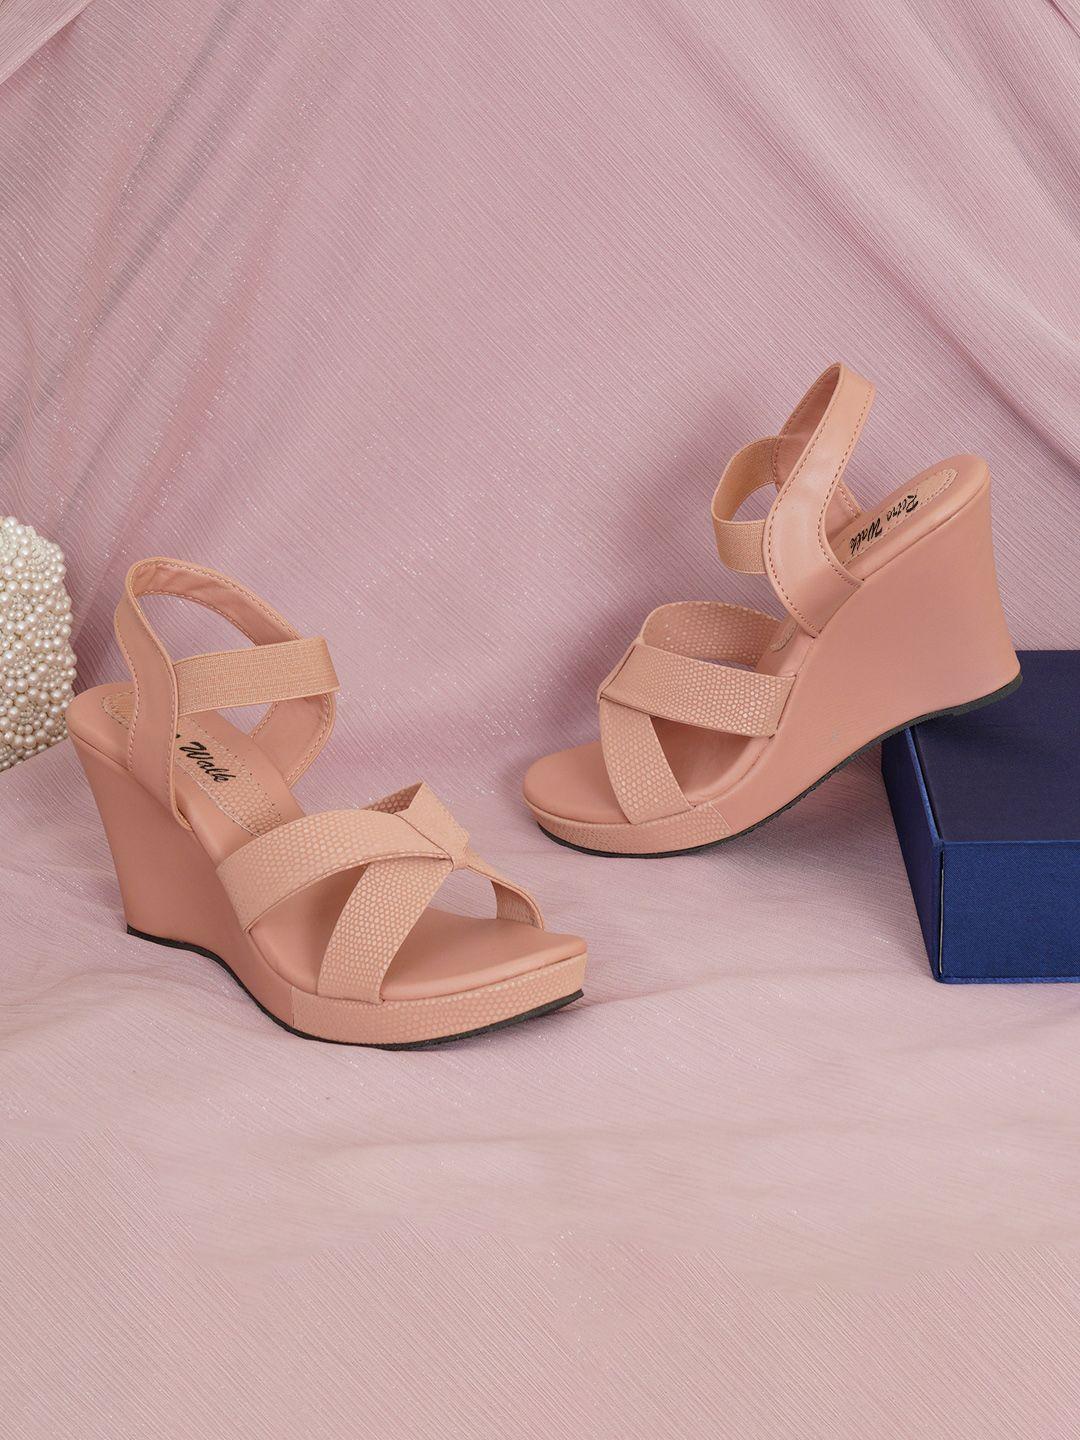 retro walk peach-coloured wedge sandals with buckles